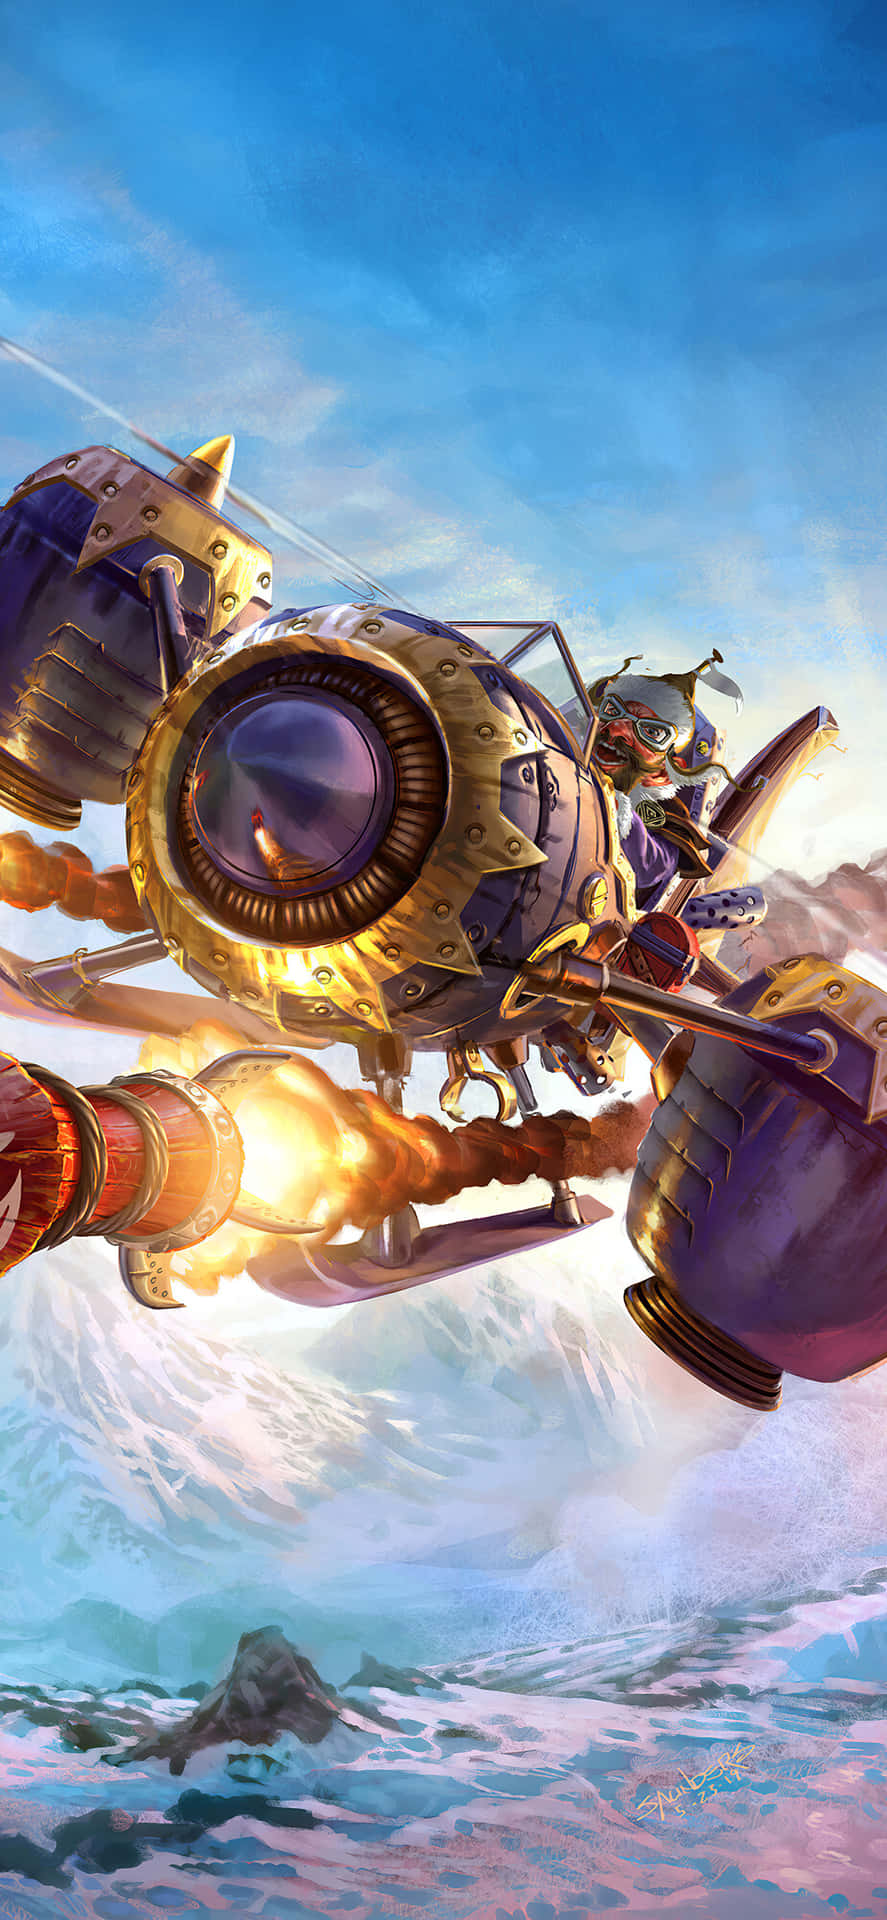 Android Hearthstone Baggrund Gyrocopter Kort